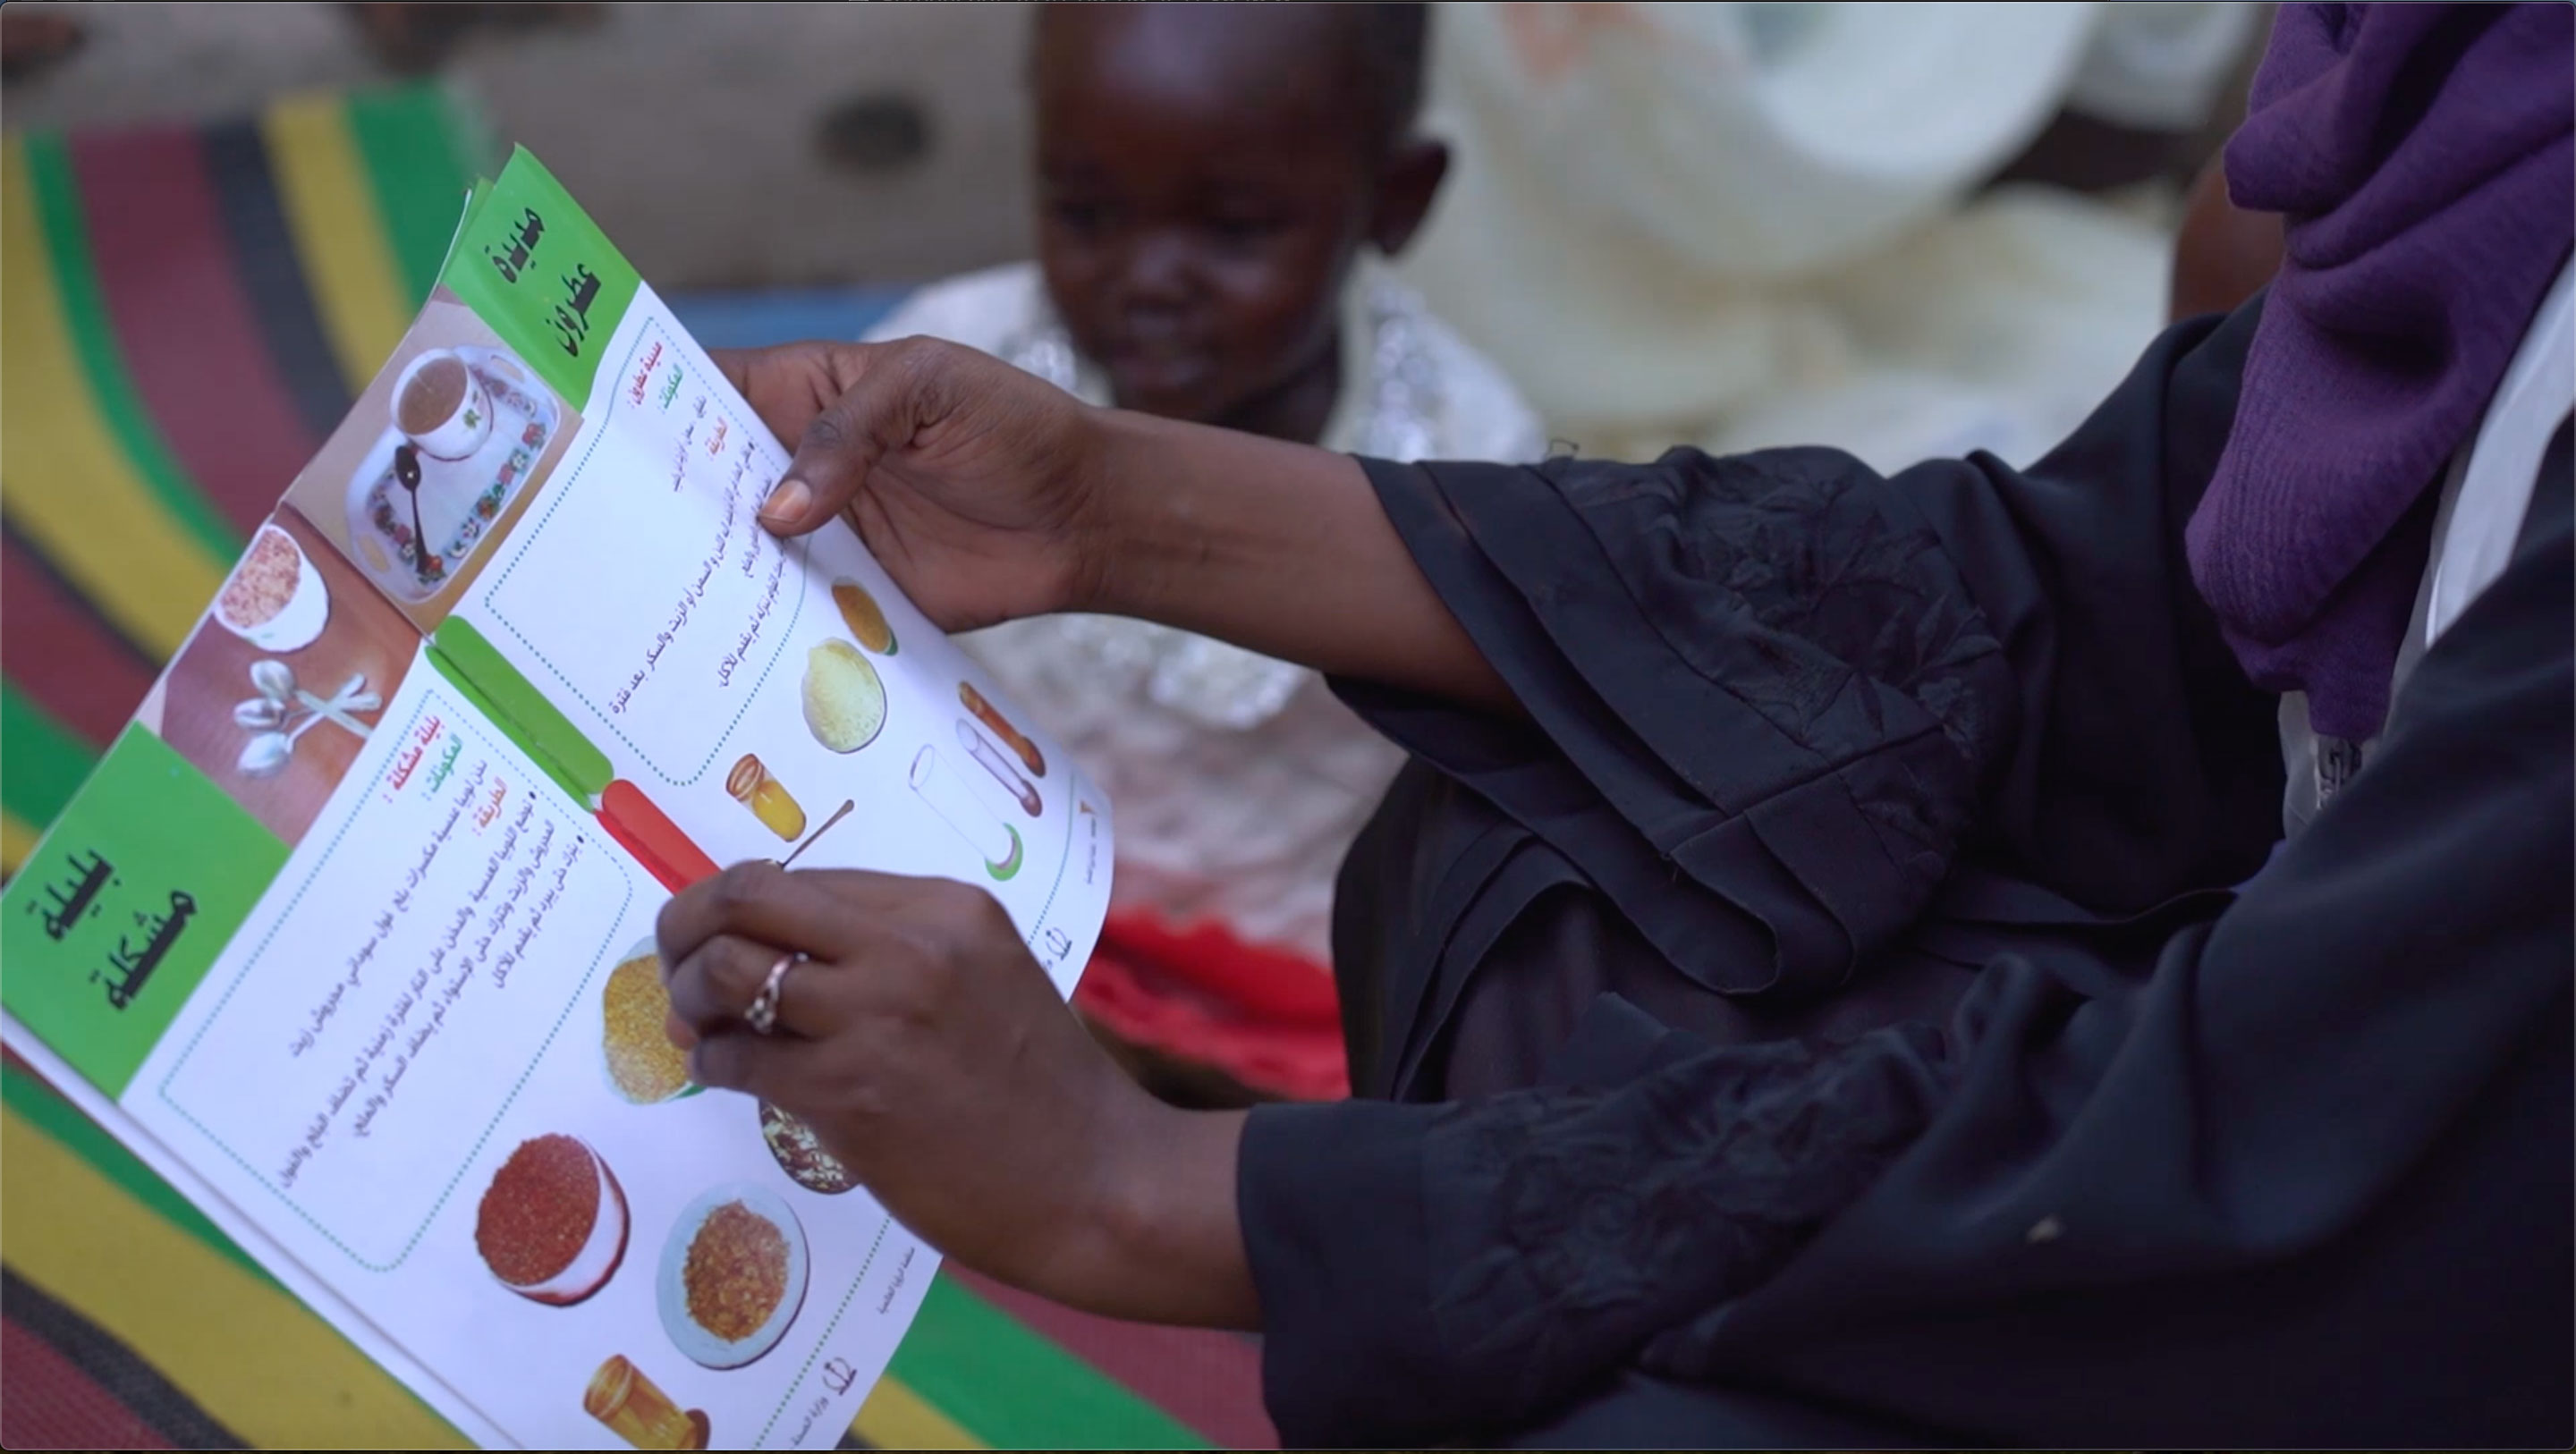 Supported by UK's DFID, World Vision is using printed information materials to increase their knowledge on nutrition. 